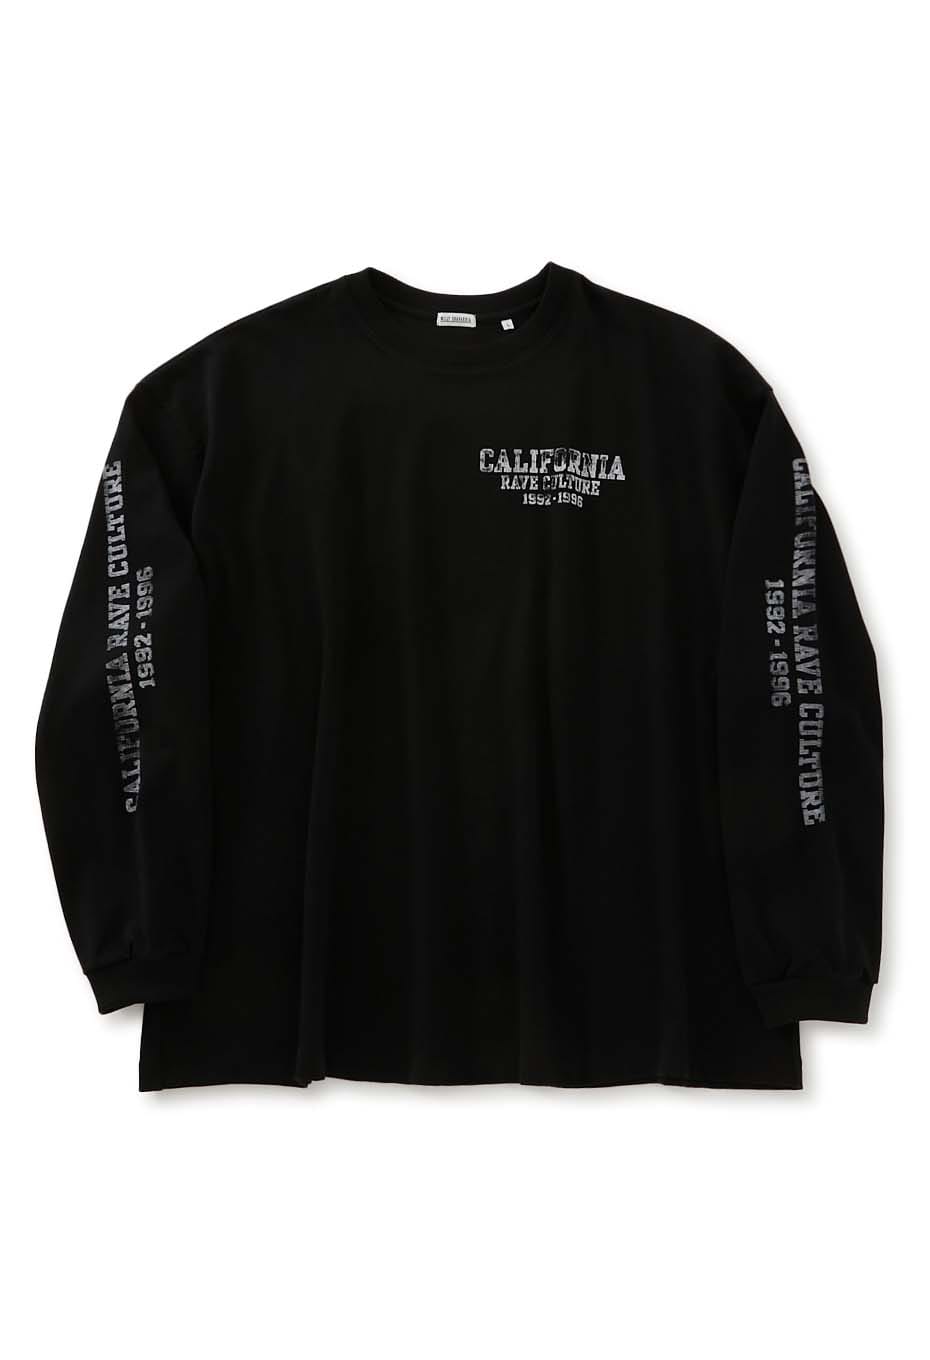 WILLY CHAVARRIA /AAP026 Rave Culture Long Sleeve T-shirts